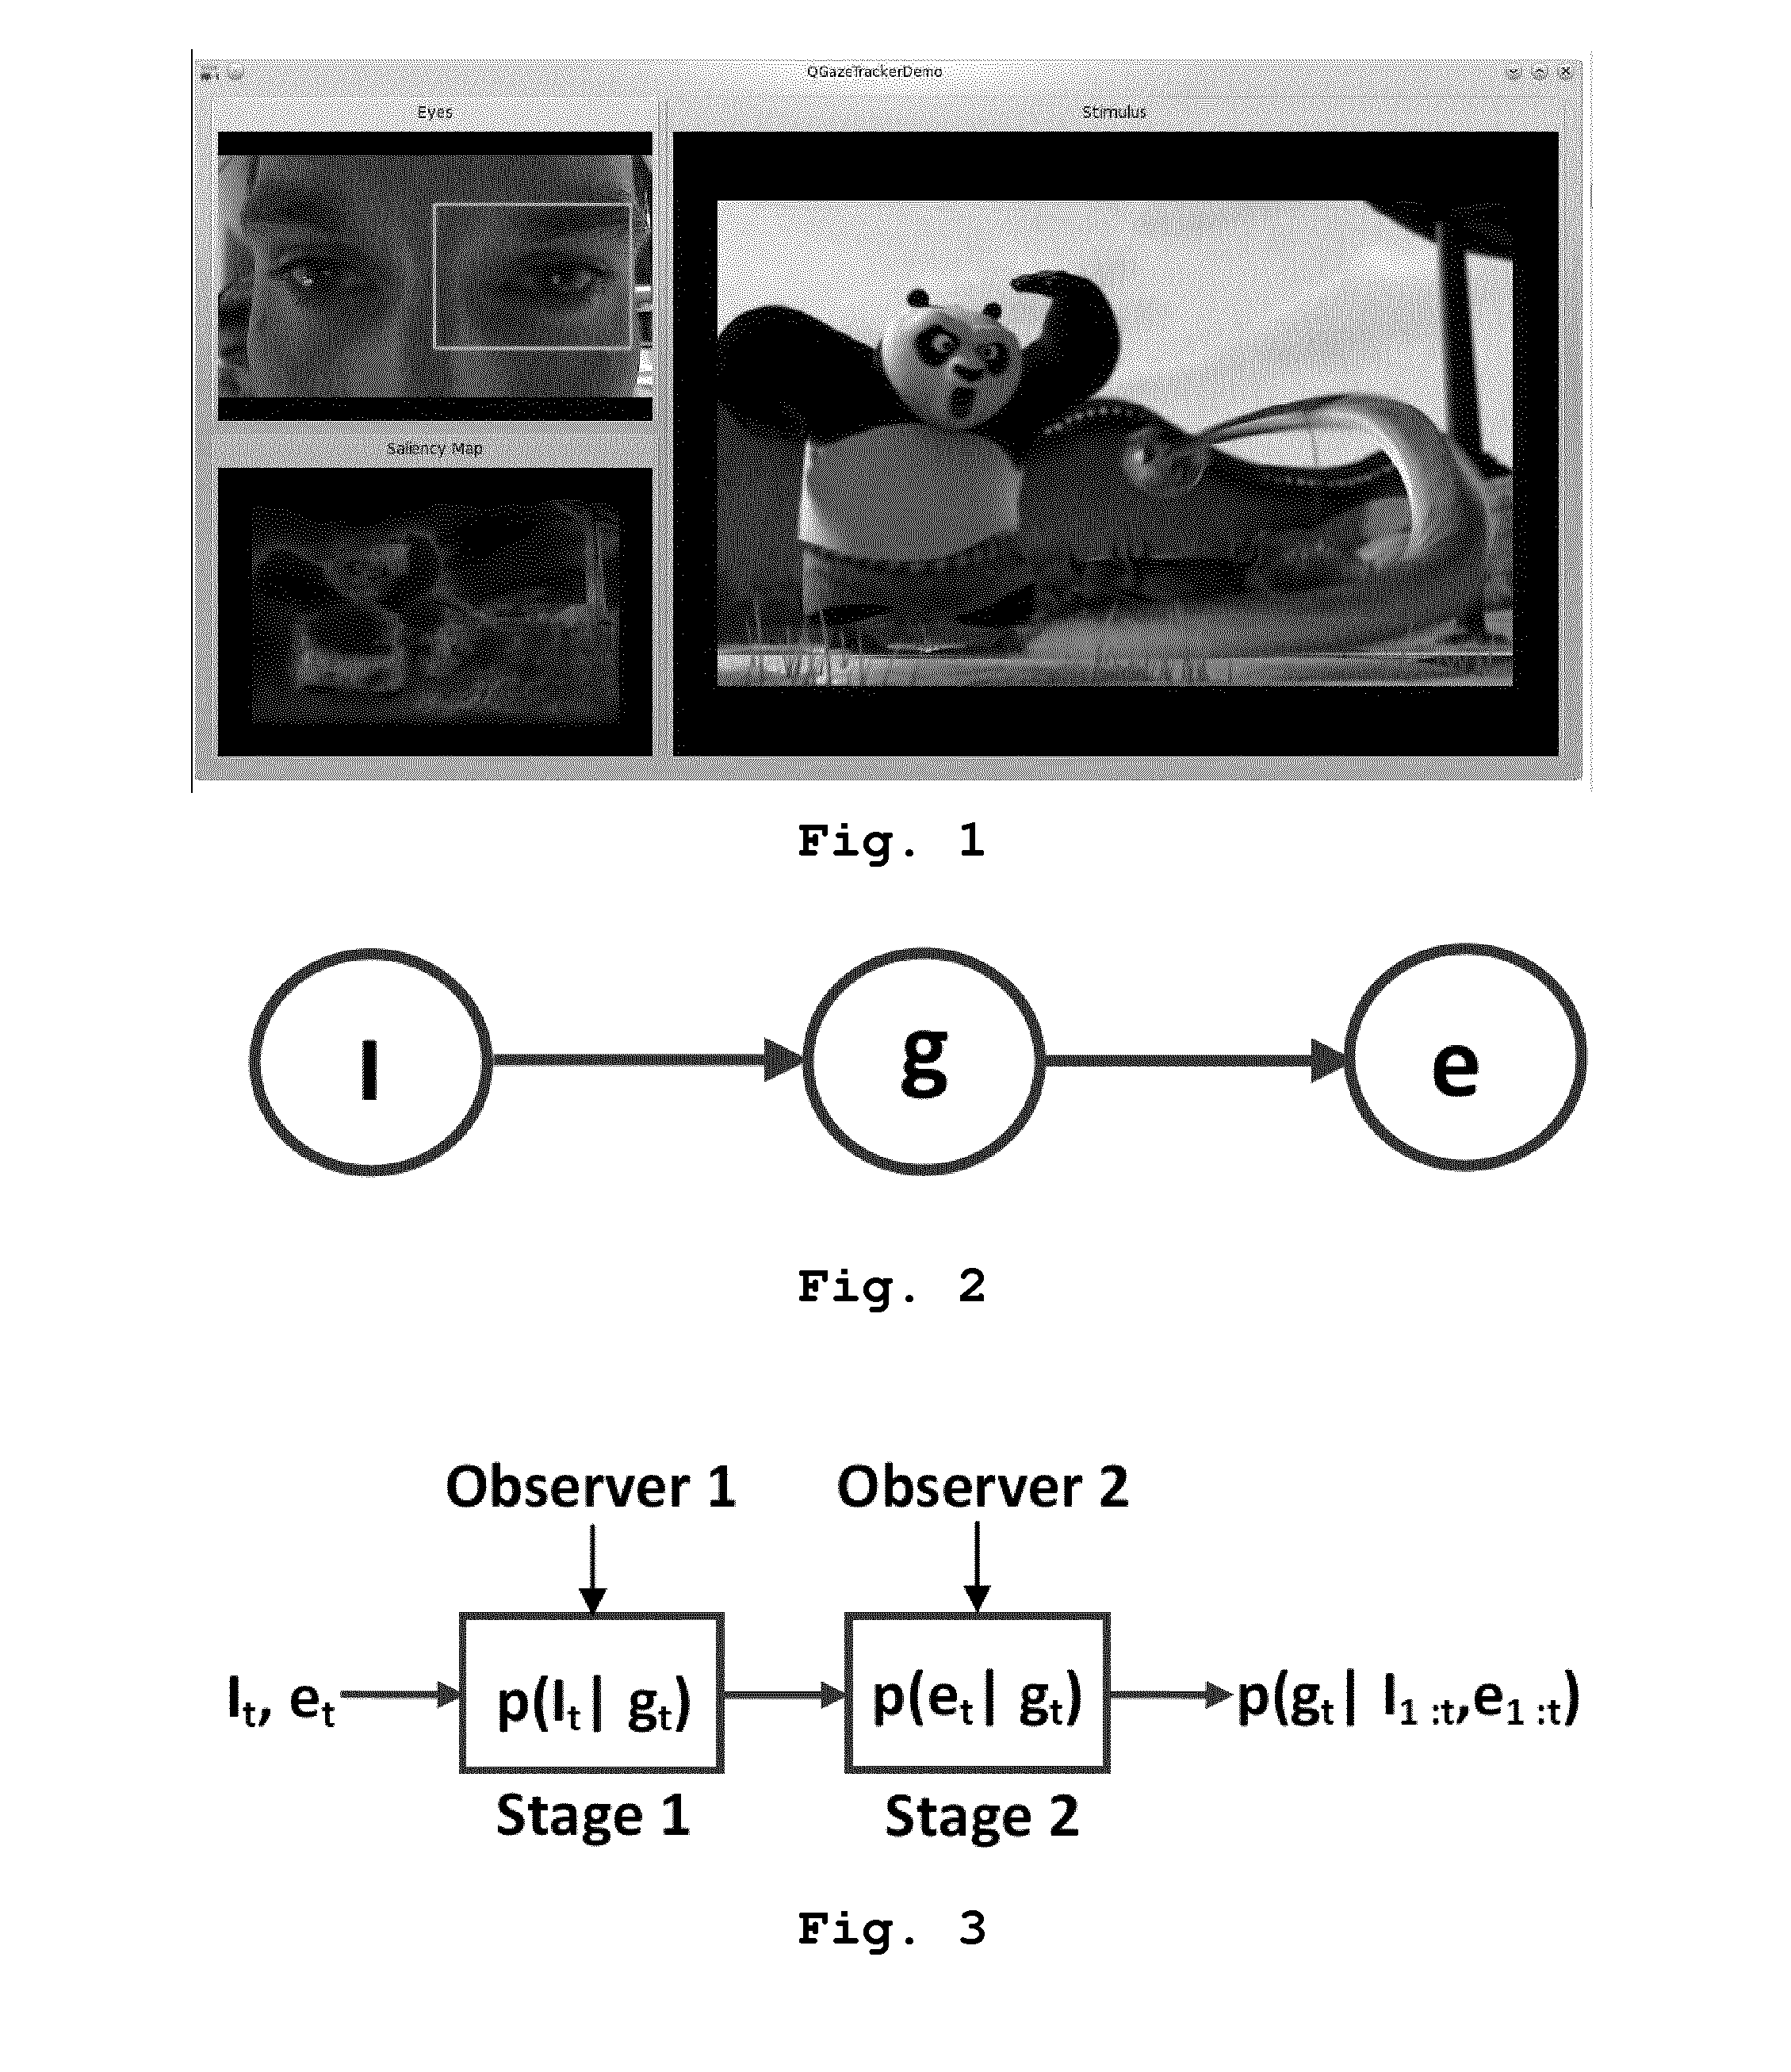 Method for calibration free gaze tracking using low cost camera